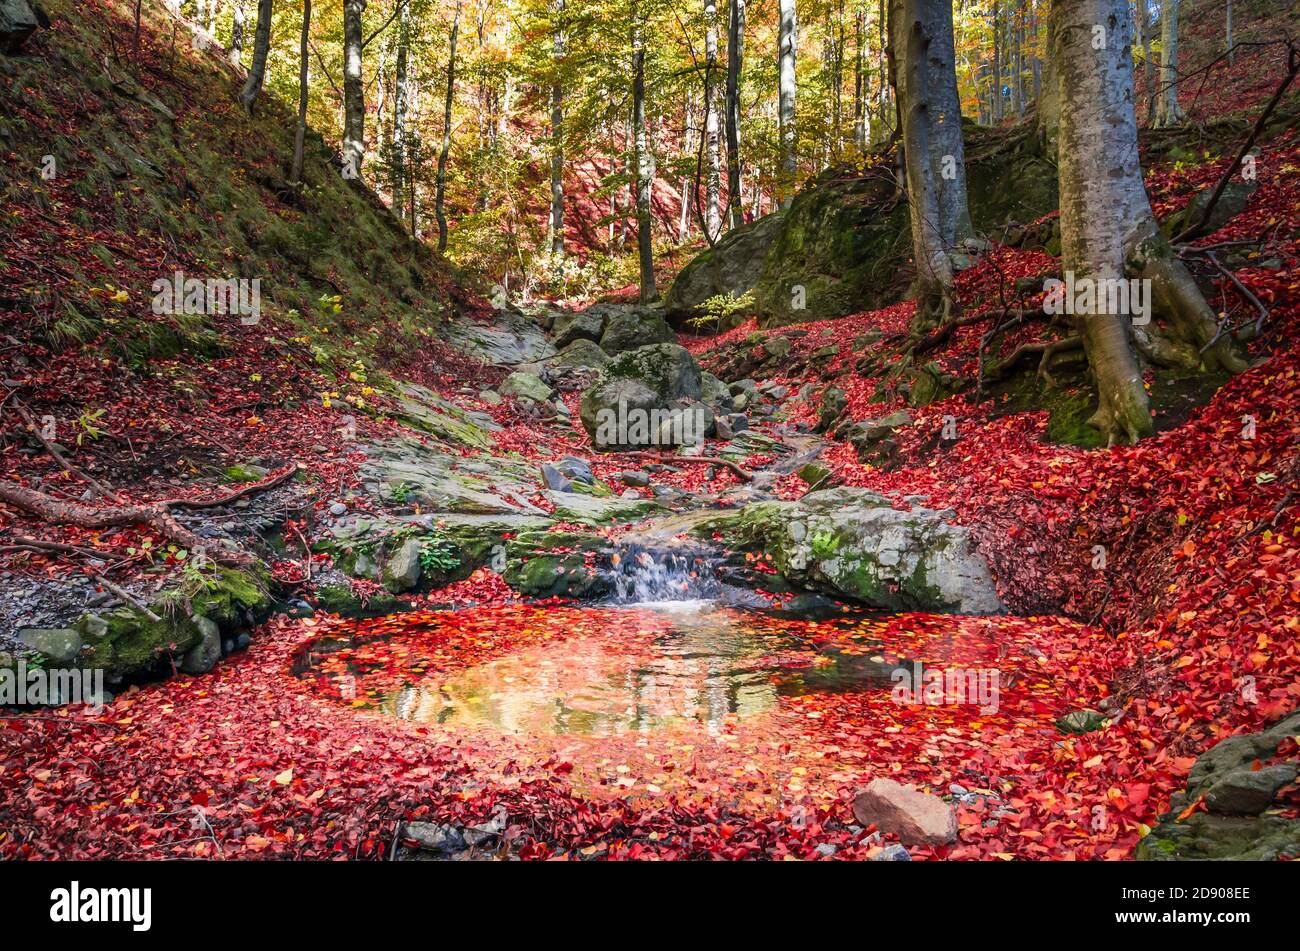 Amazing autumn forest landscape. Little stream flowing into the woods between rocks and trees. The foliage are fall down near the rivulet. Stock Photo